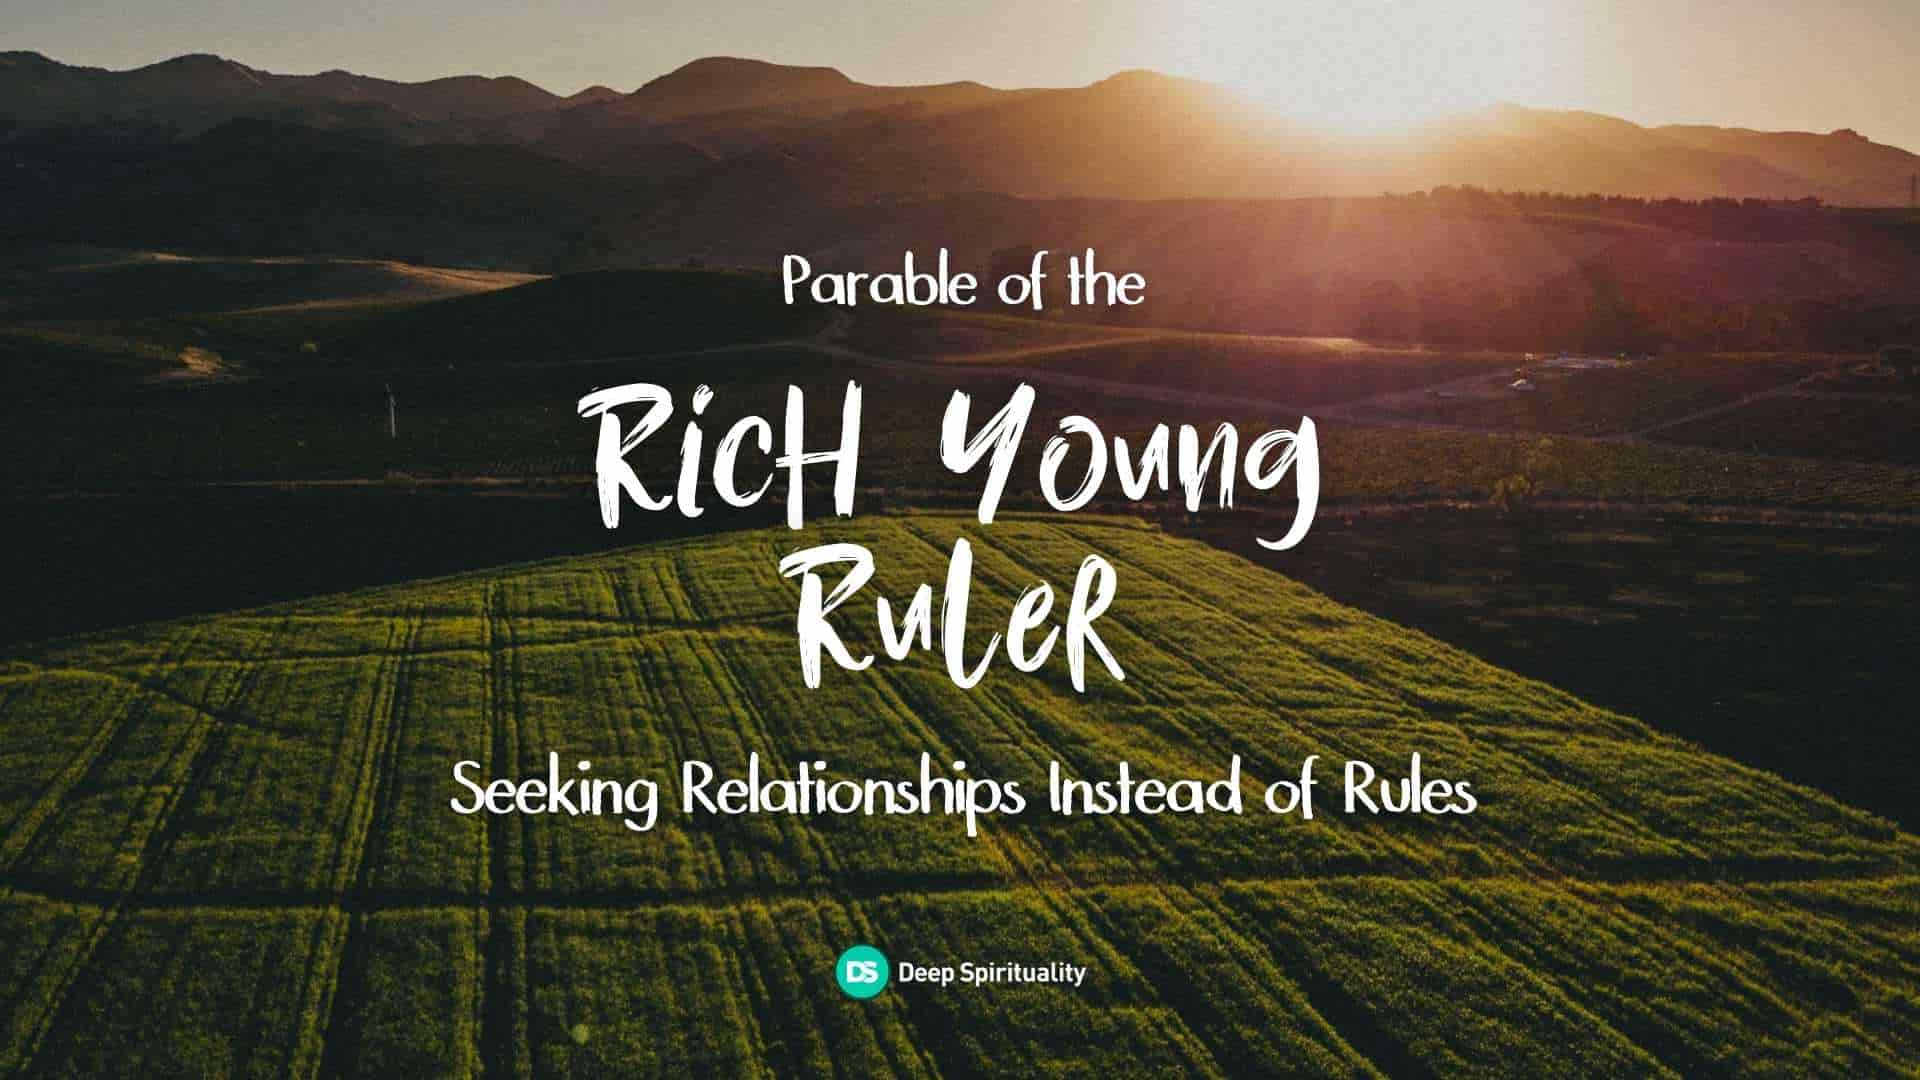 The Rich Young Ruler: How to Stop Seeing Rules and Start Seeing Relationship 6